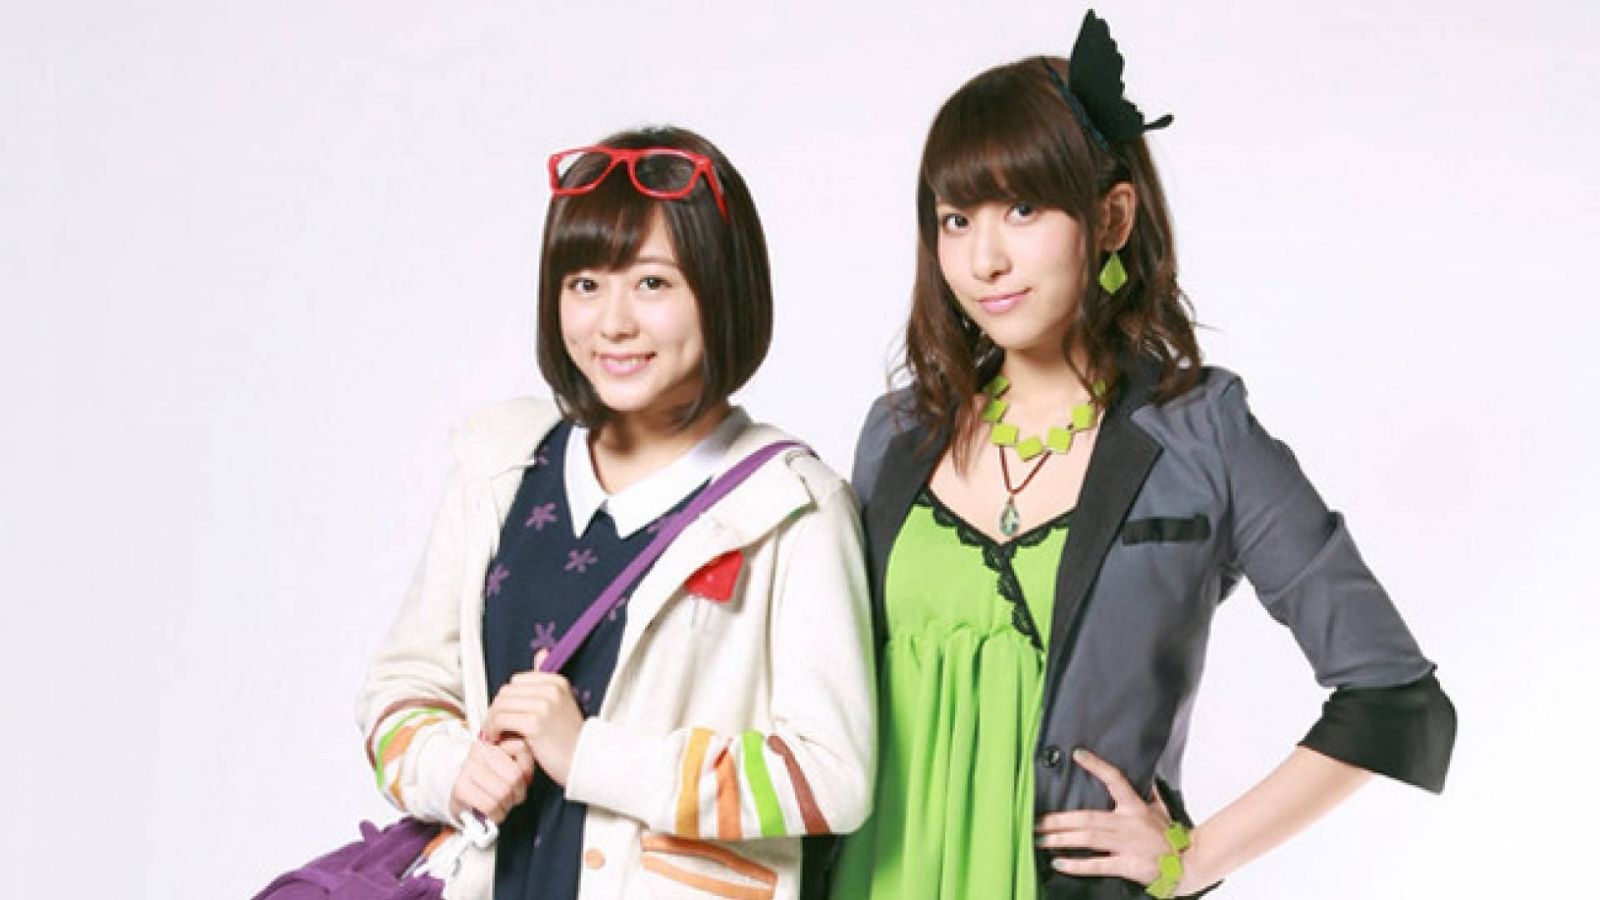 New Single from Inori Minase and Anju Inami © Sony Music Artists Inc. All rights reserved.